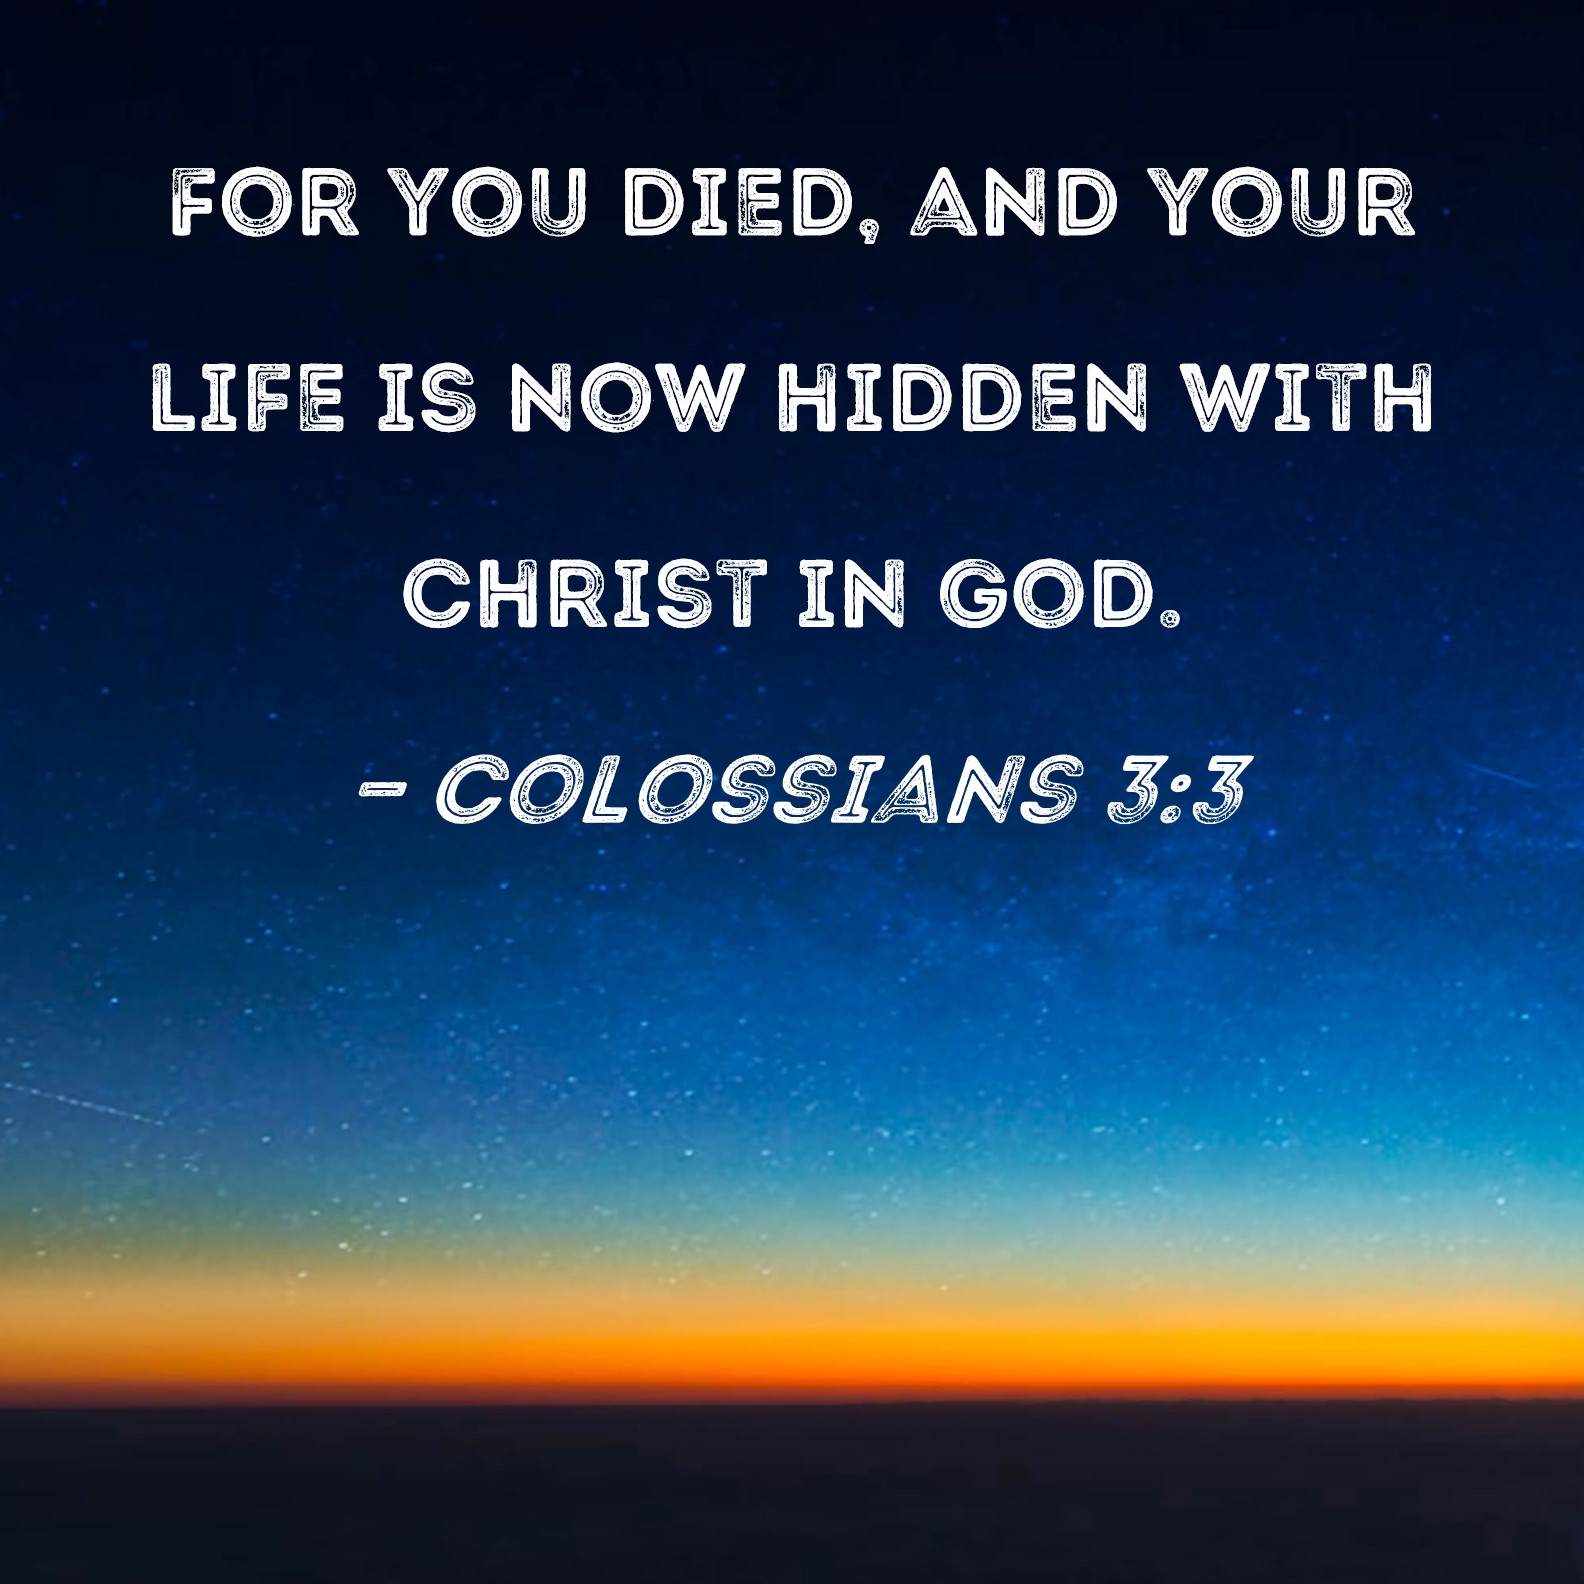 Colossians 3:3 For you died, and your life is now hidden with Christ in God.